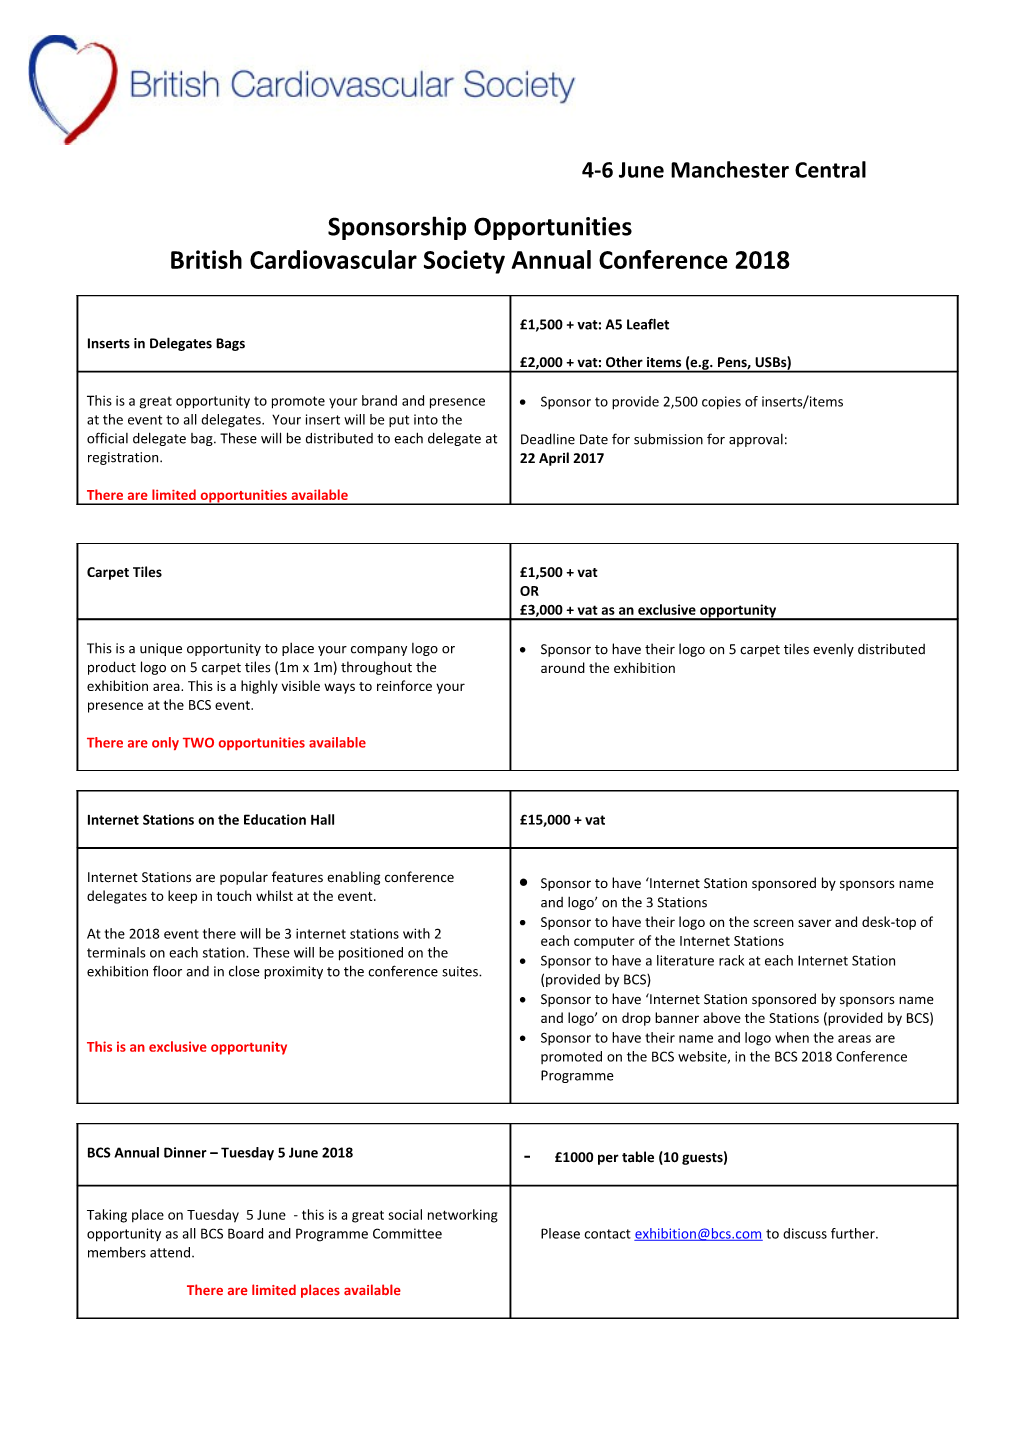 British Cardiovascular Society Annual Conference 2018